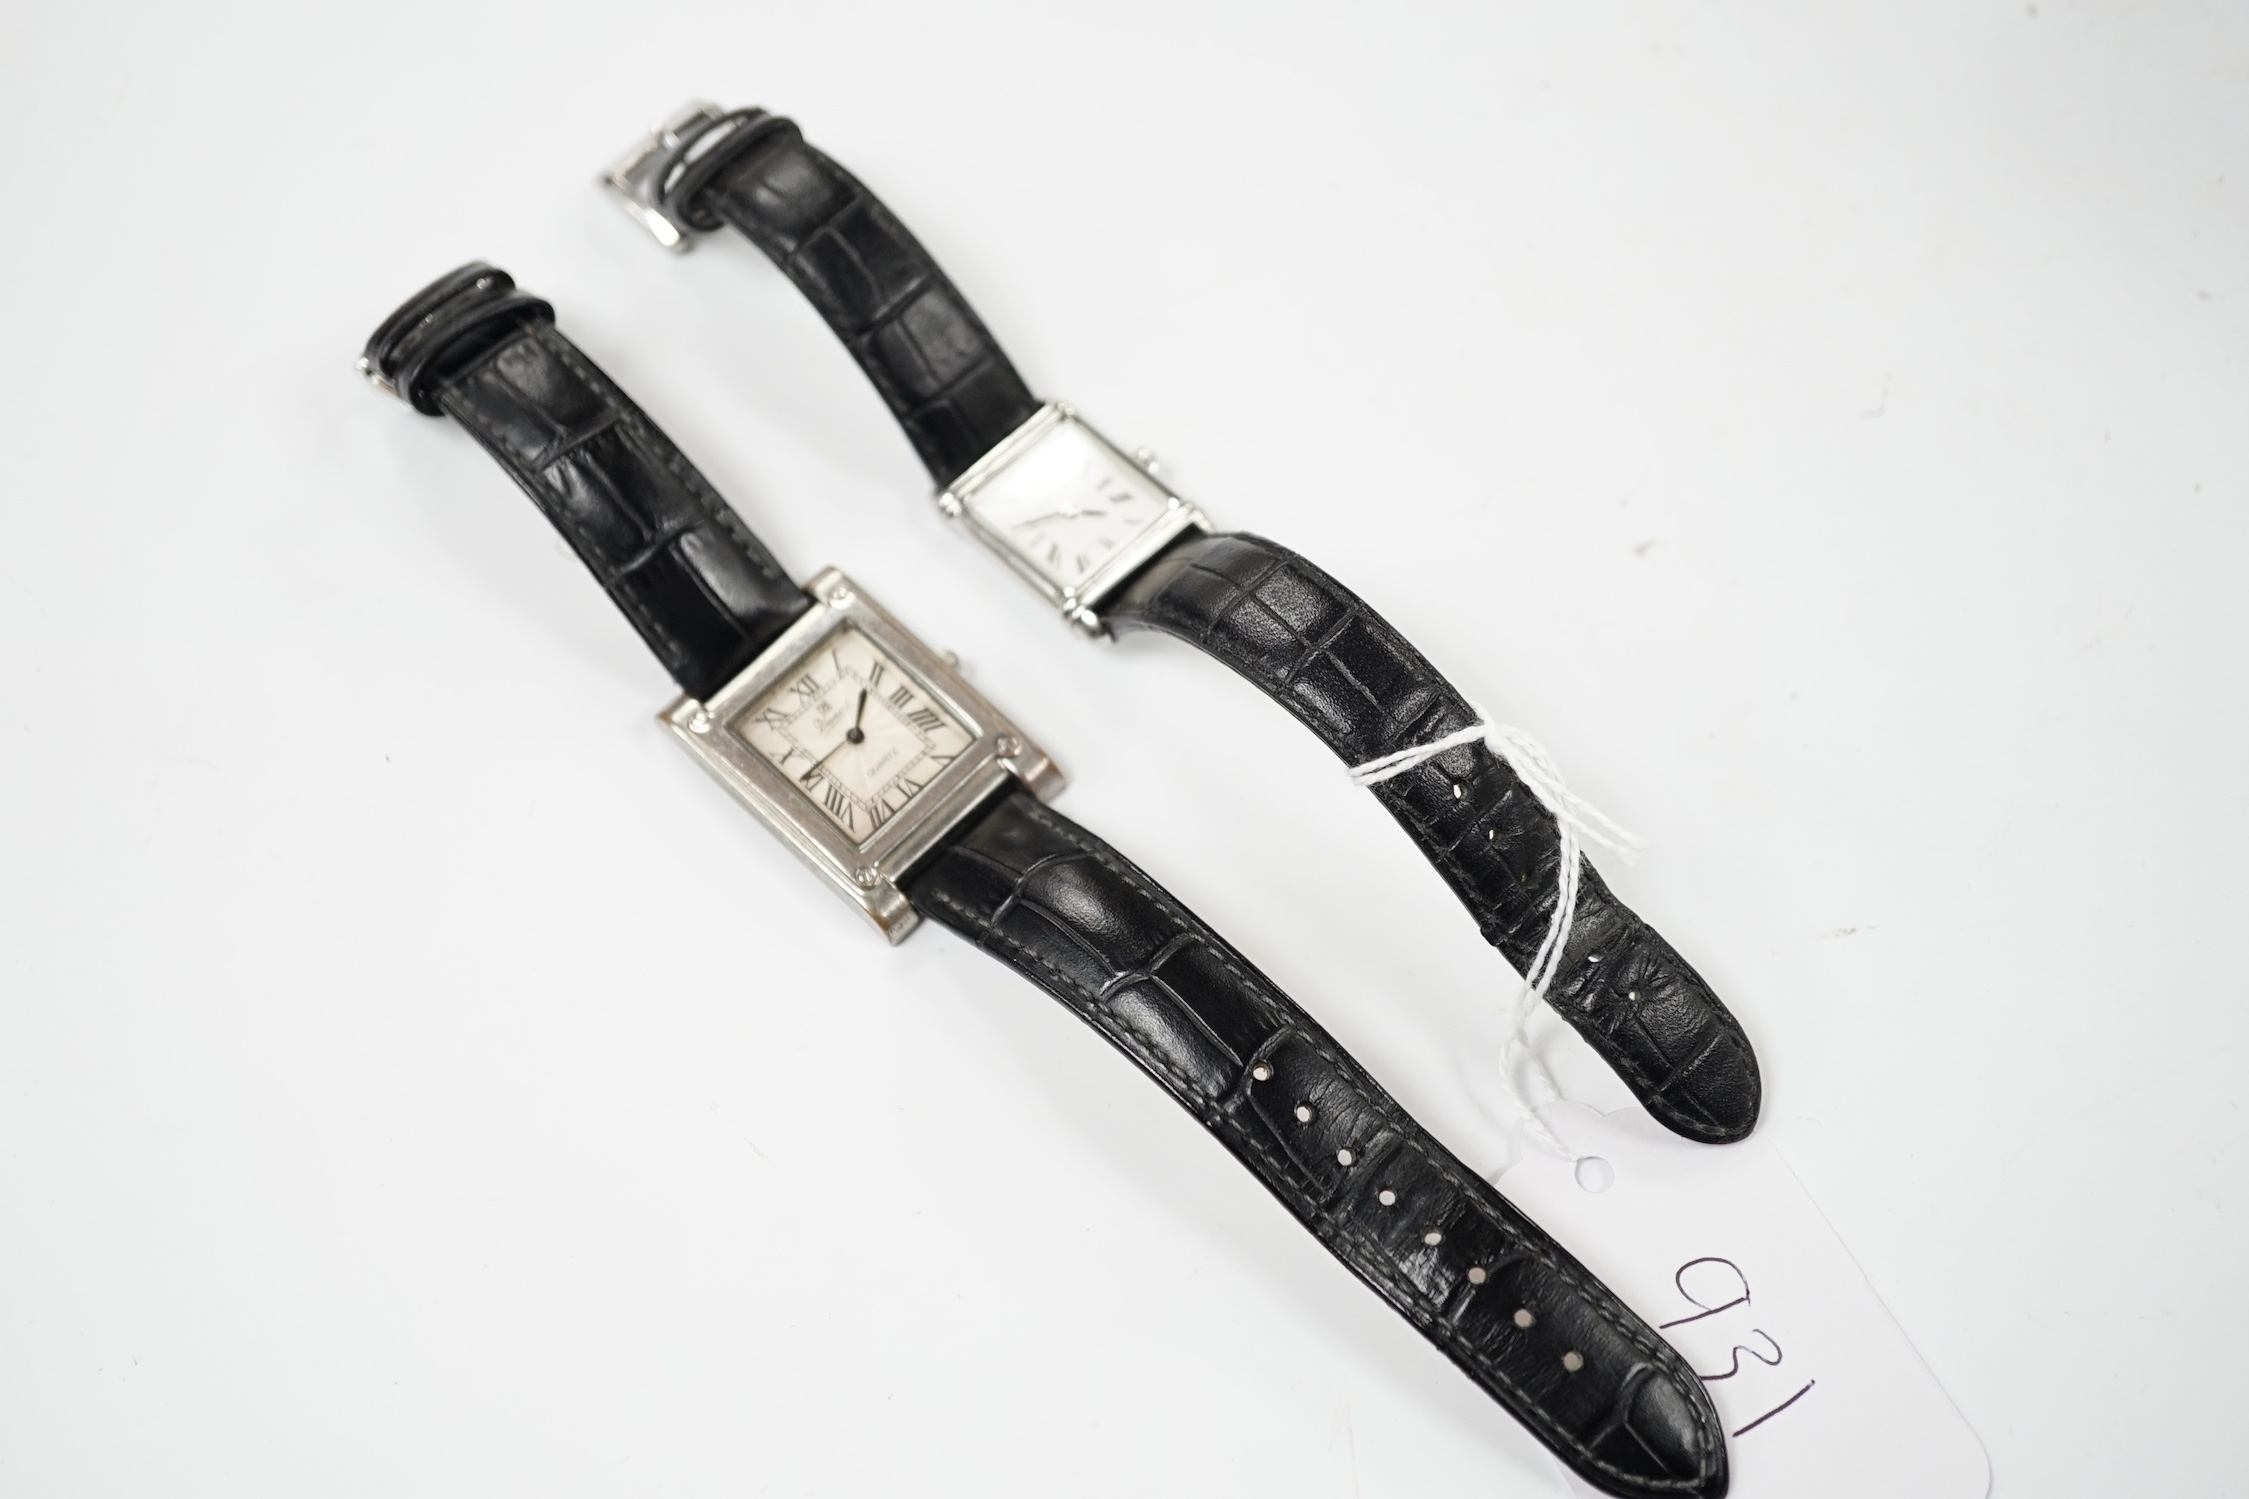 A lady's modern stainless steel Michel Herbelin rectangular dial quartz wrist watch, on a Herbelin leather strap, with original box, together with a stainless steel Diamant quartz wrist watch.